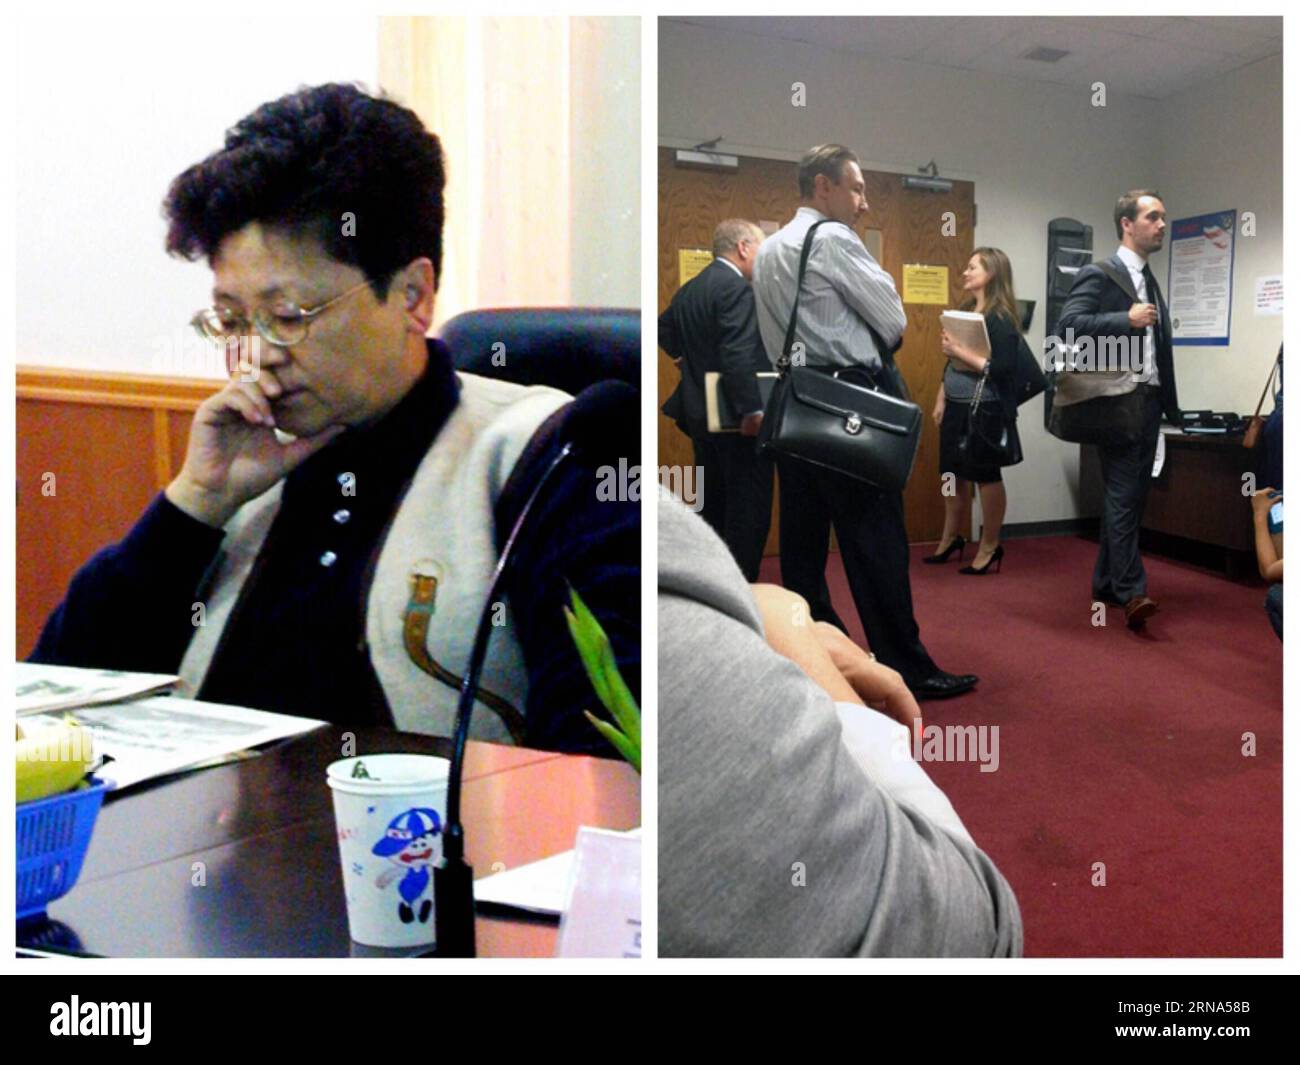 (160107) -- BEIJING, June 9, 2015 -- Combination photo taken shows a file photo of Yang Xiuzhu in Wenzhou of east China s Zhejiang Province in 2002 (L) and Yang Xiuzhu s lawyer Vlad Kuzmin (3rd R) waits prior to Yang s hearing at an immigration court in New York, the United States, June 9, 2015 (R). The first hearing in the trial of China s most wanted economic fugitive Yang Xiuzhu took place in a New York immigration court on June 9. Yang, who went into hiding after being sought after by anti-corruption investigators in China, has been detained in the United States. Yang is one of the 100 Chi Stock Photo